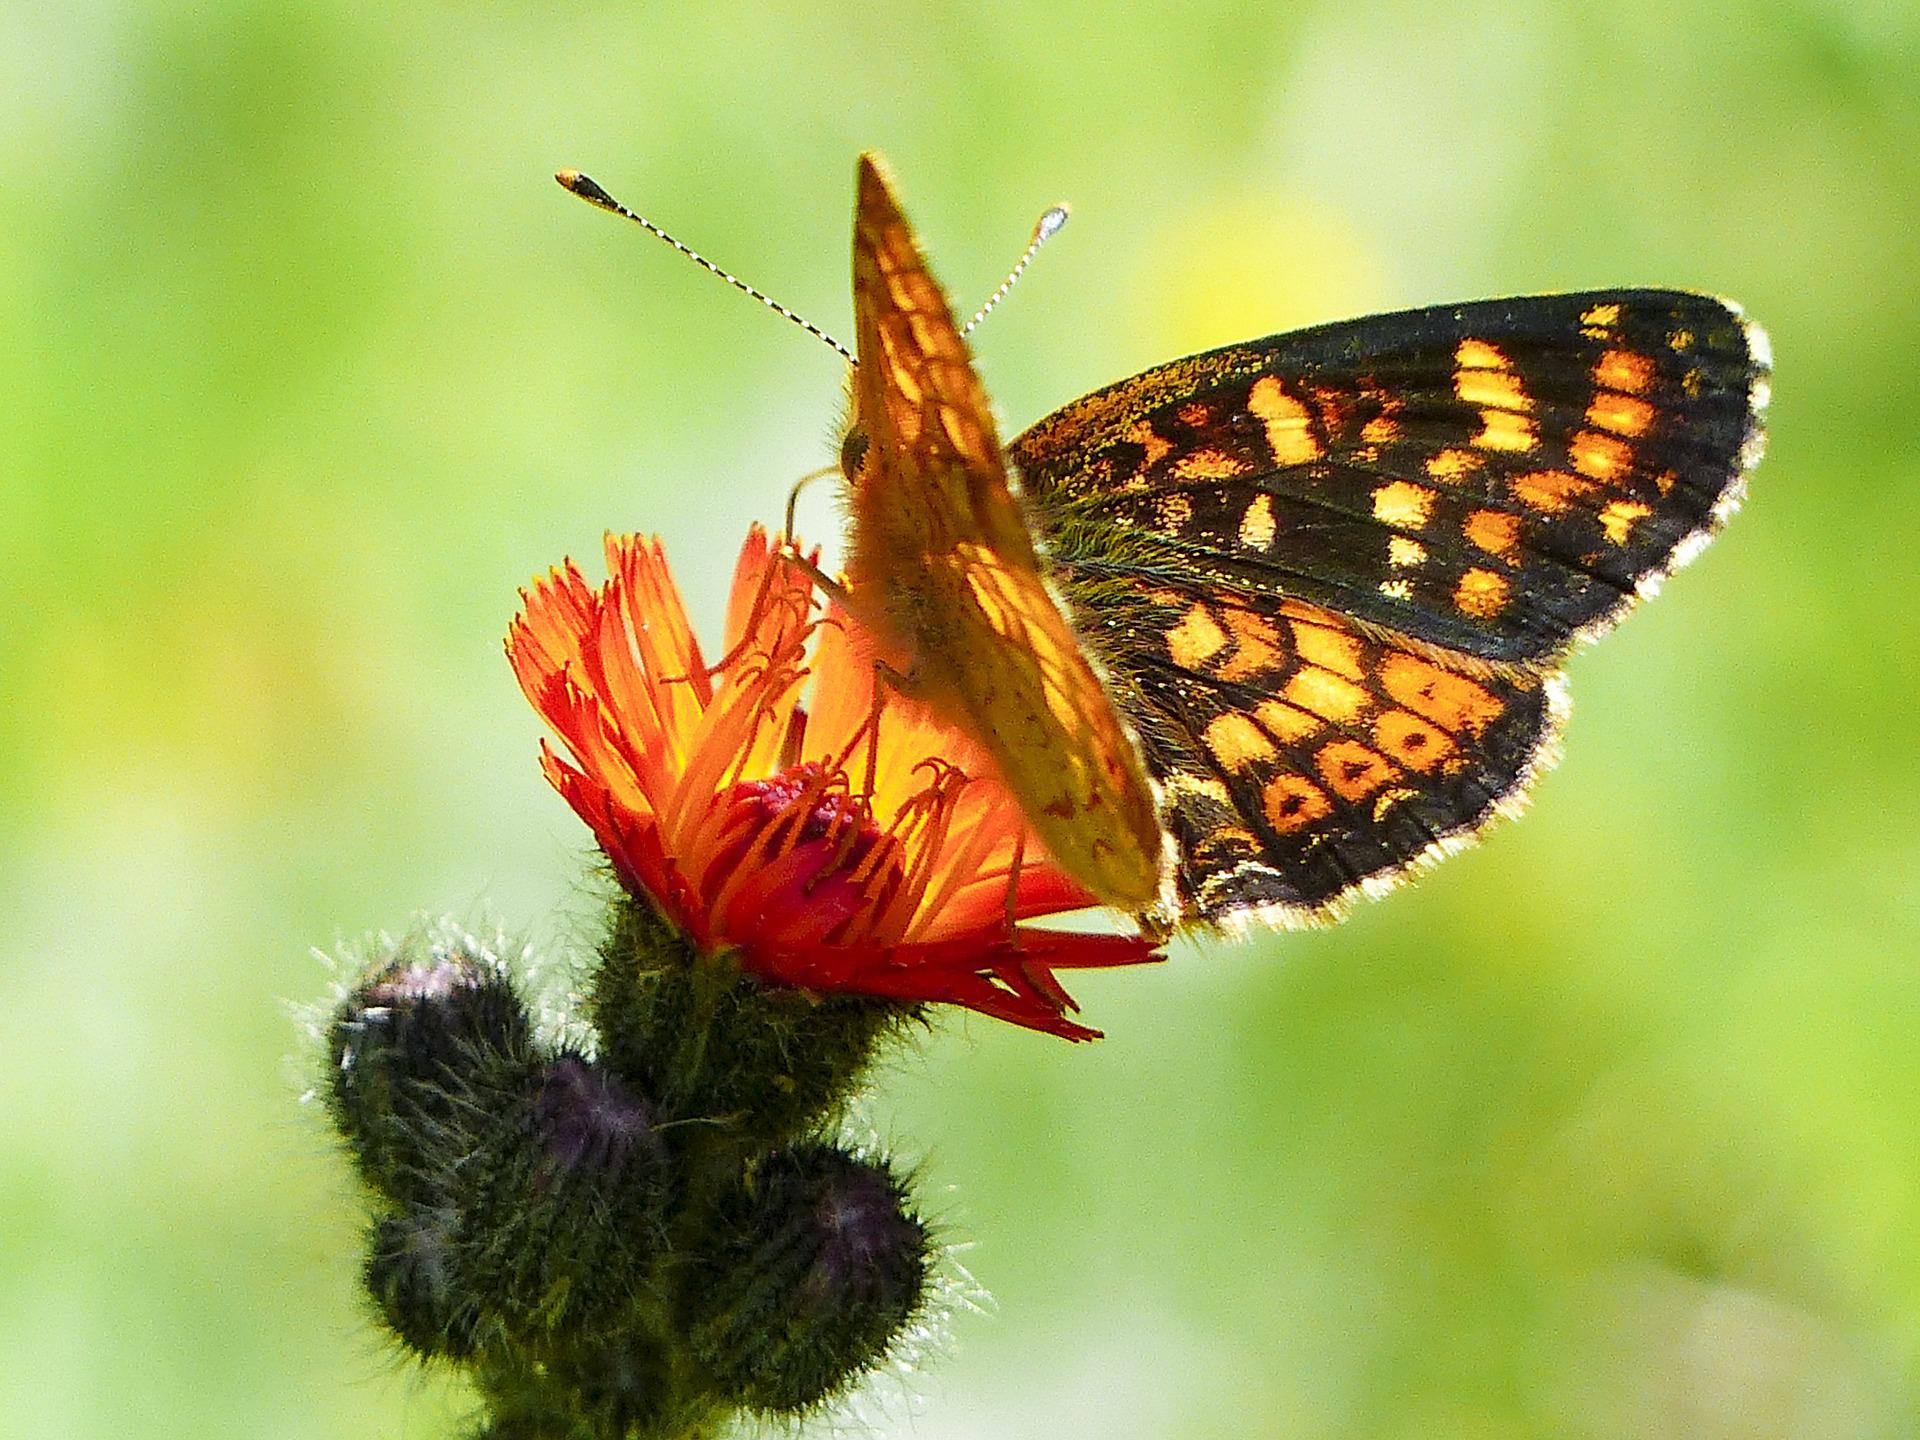 Hawkweed flower with butterfly.